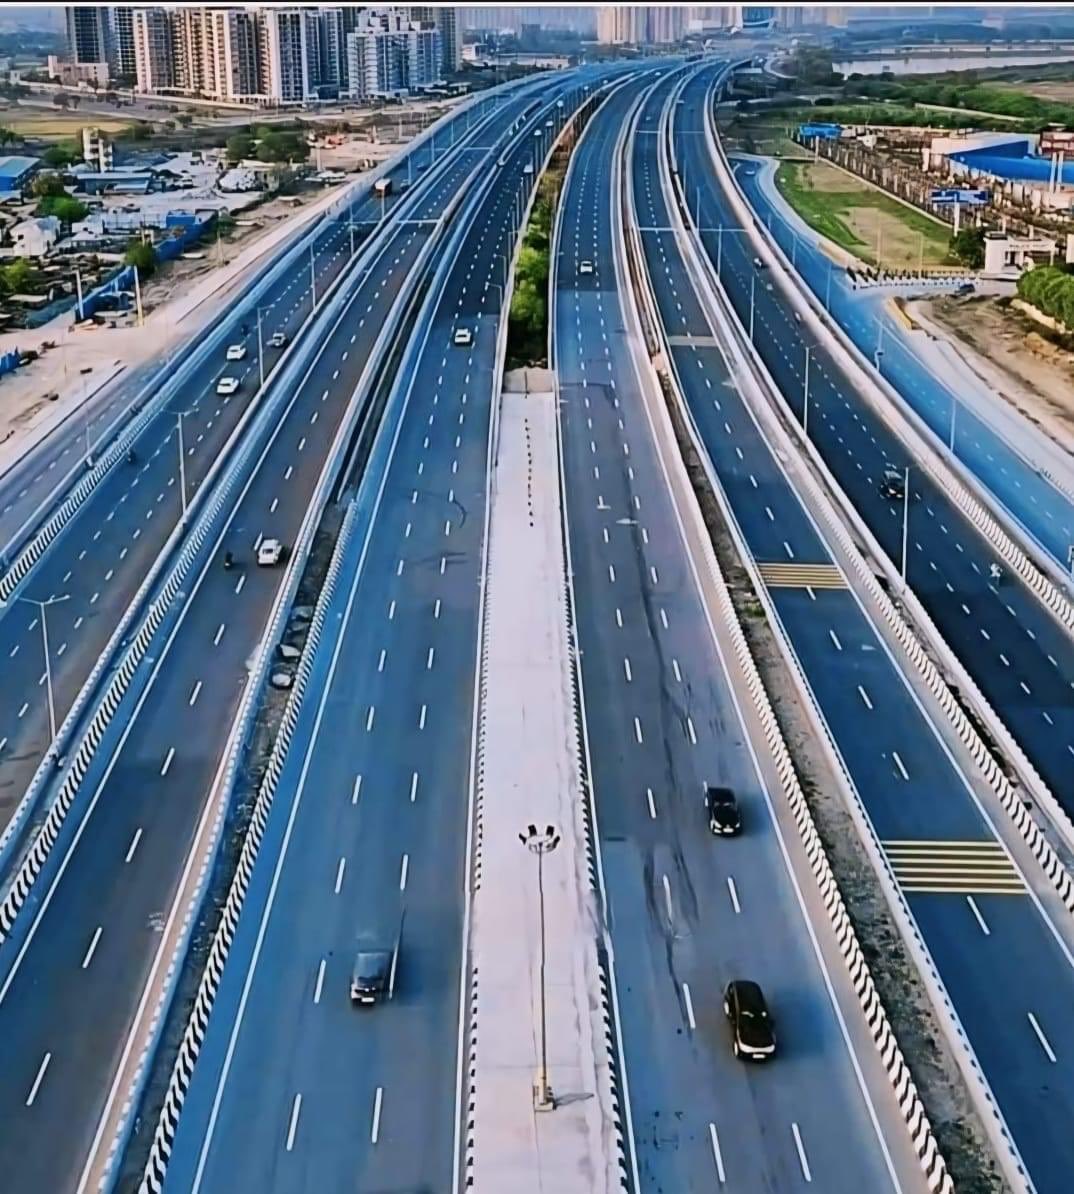 It's not UK, USA OR China, It's My Lovely Bharat 🇮🇳

This is what they don’t want to see. This is what Congress did not want to give to the people.

But #ModiHaiToMumkinHai 

@nitin_gadkari @narendramodi